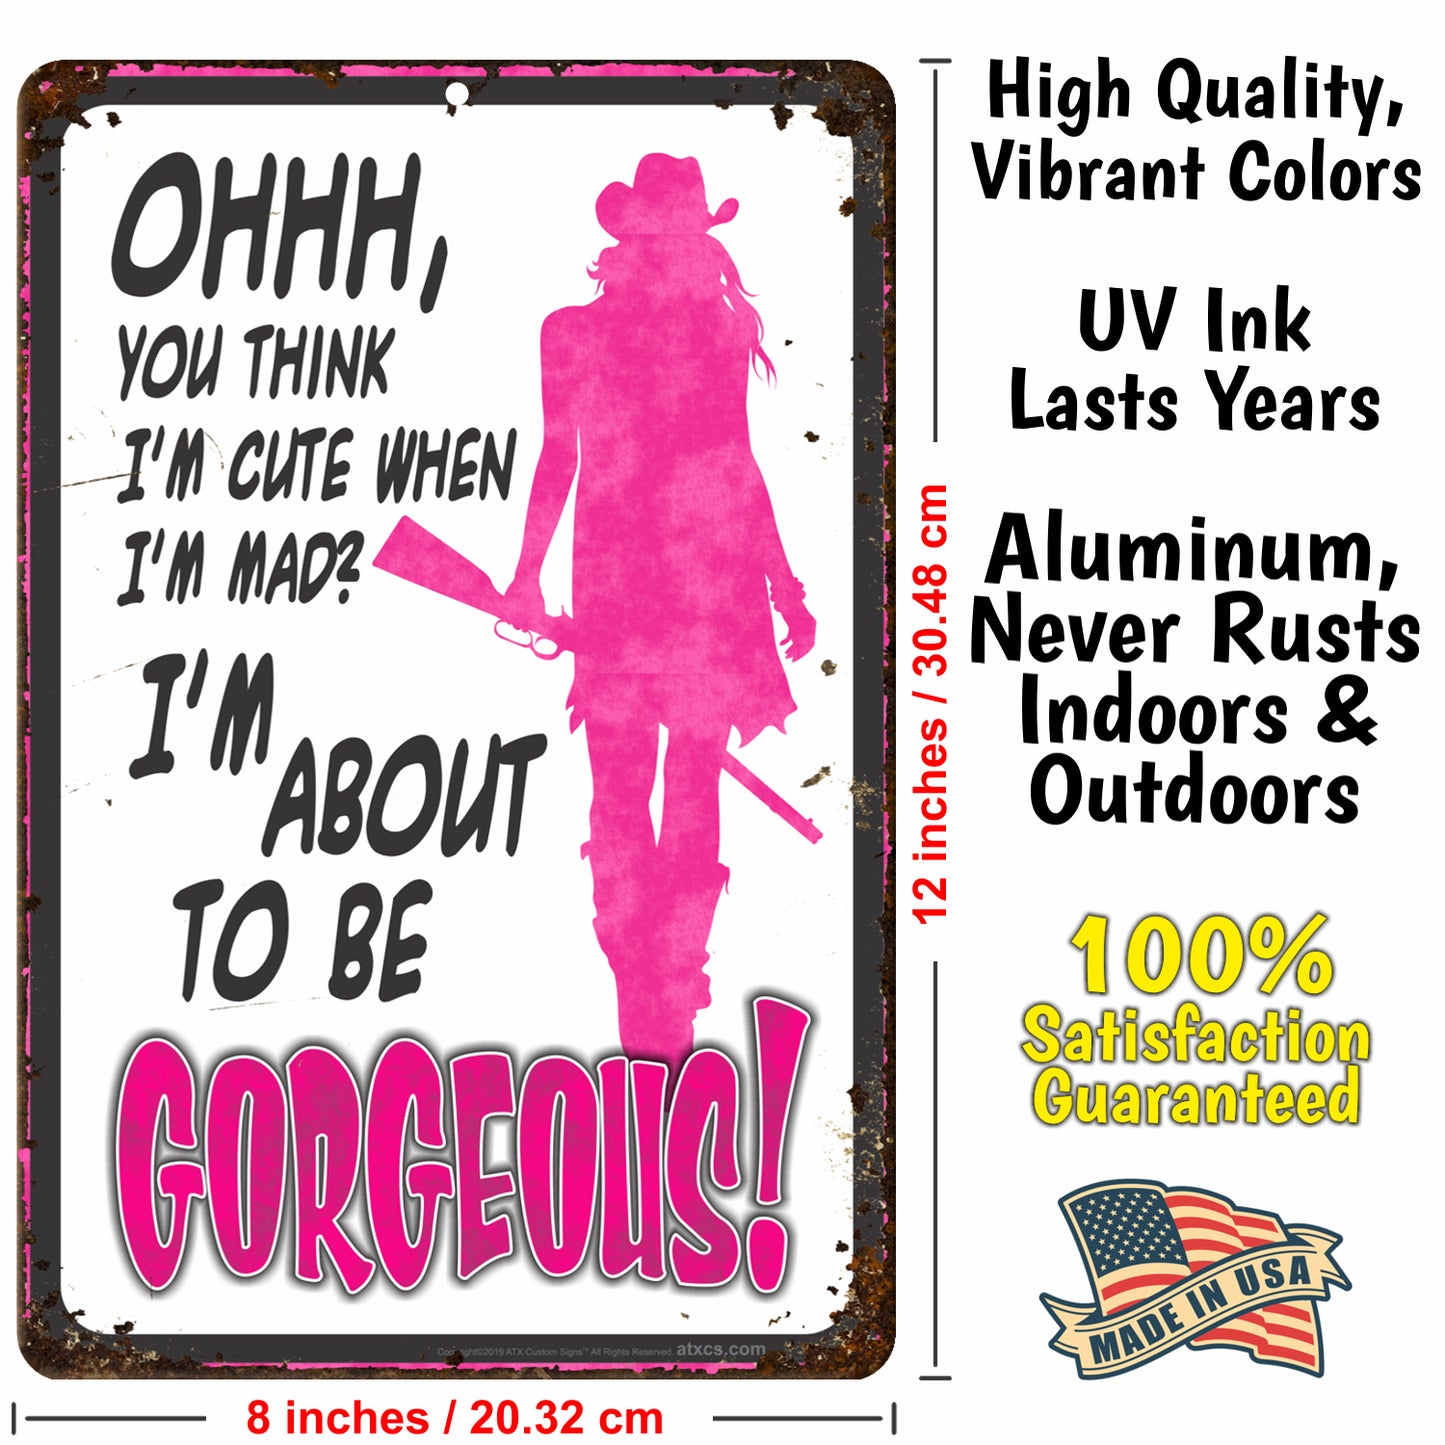 Funny Metal Warning Sign for Bars - Ohhh, You Think I'm Cute When Im mad? I'm About to be Gorgeous! (Pink Rustic Decor) - Size 8 x 12